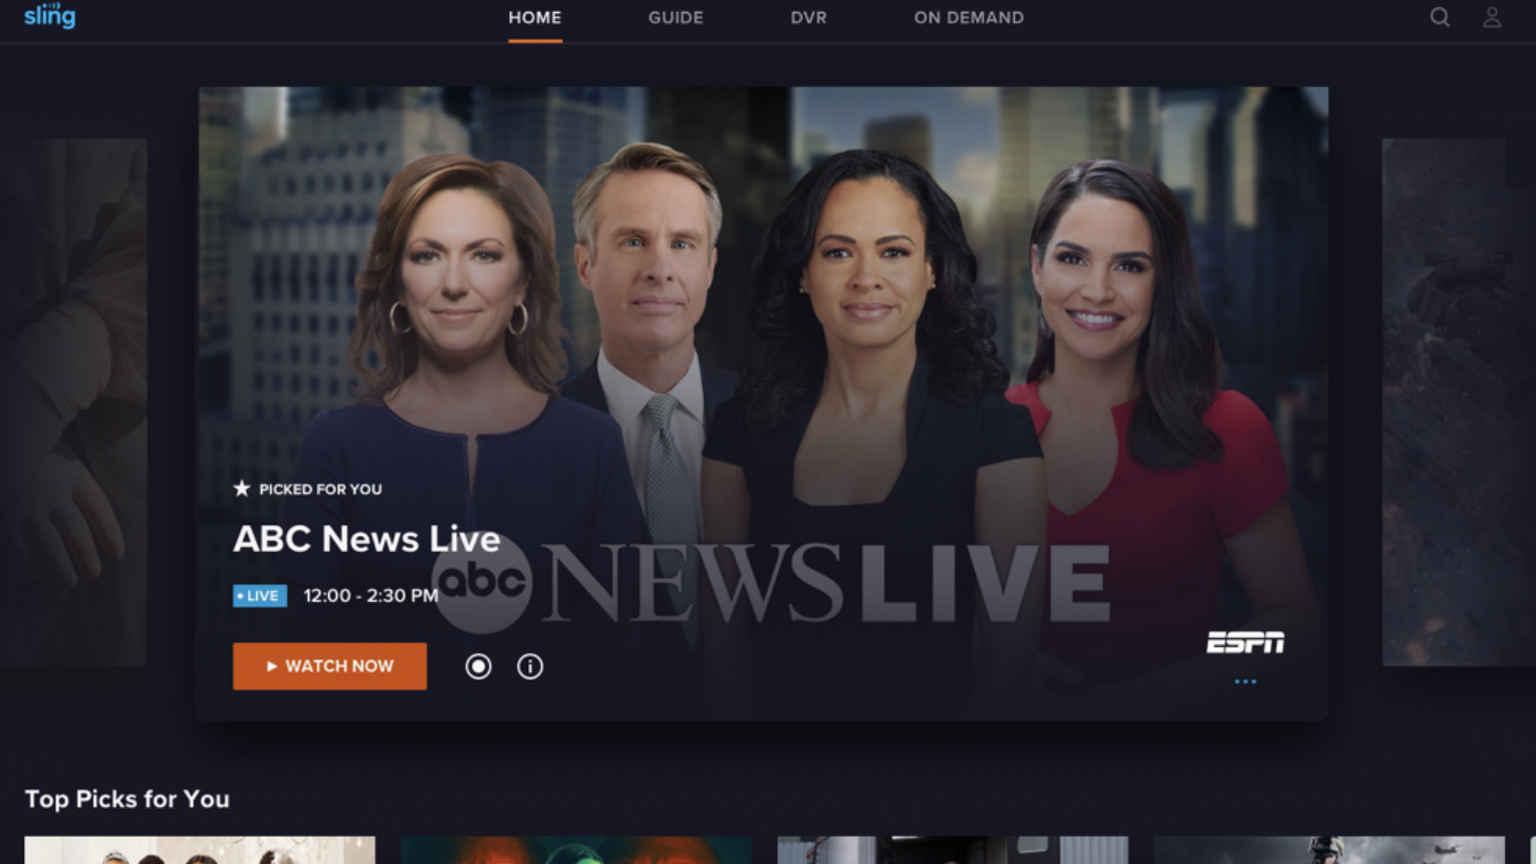 Sling TV Launches Free Streaming Service 'Sling Freestream' with